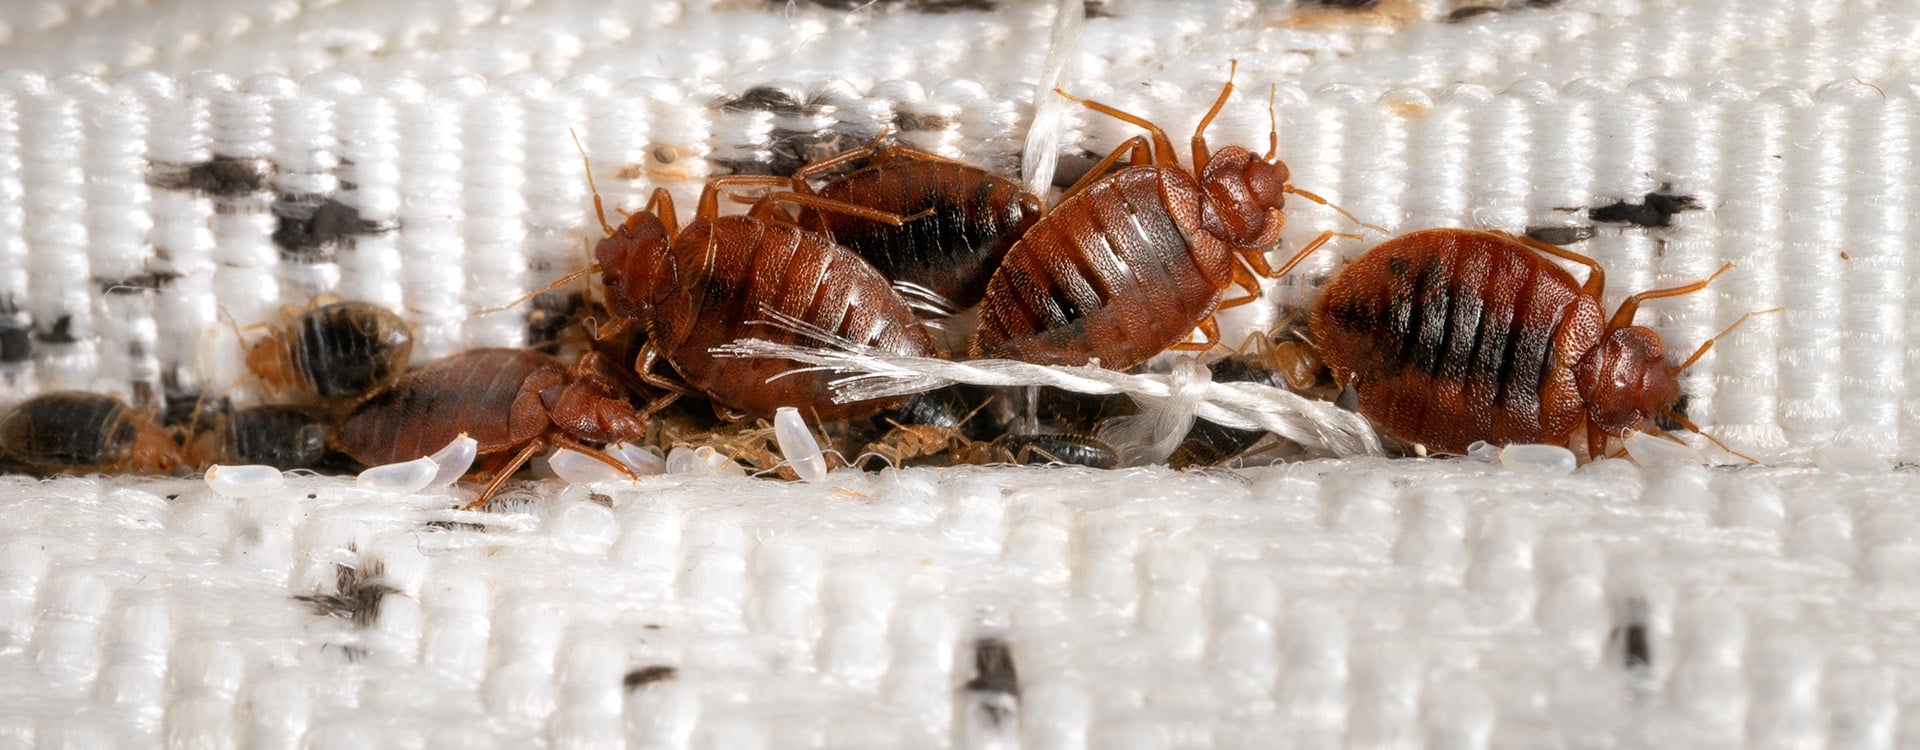 adult bed bugs, nymphs, and bed bug eggs in mattress seam